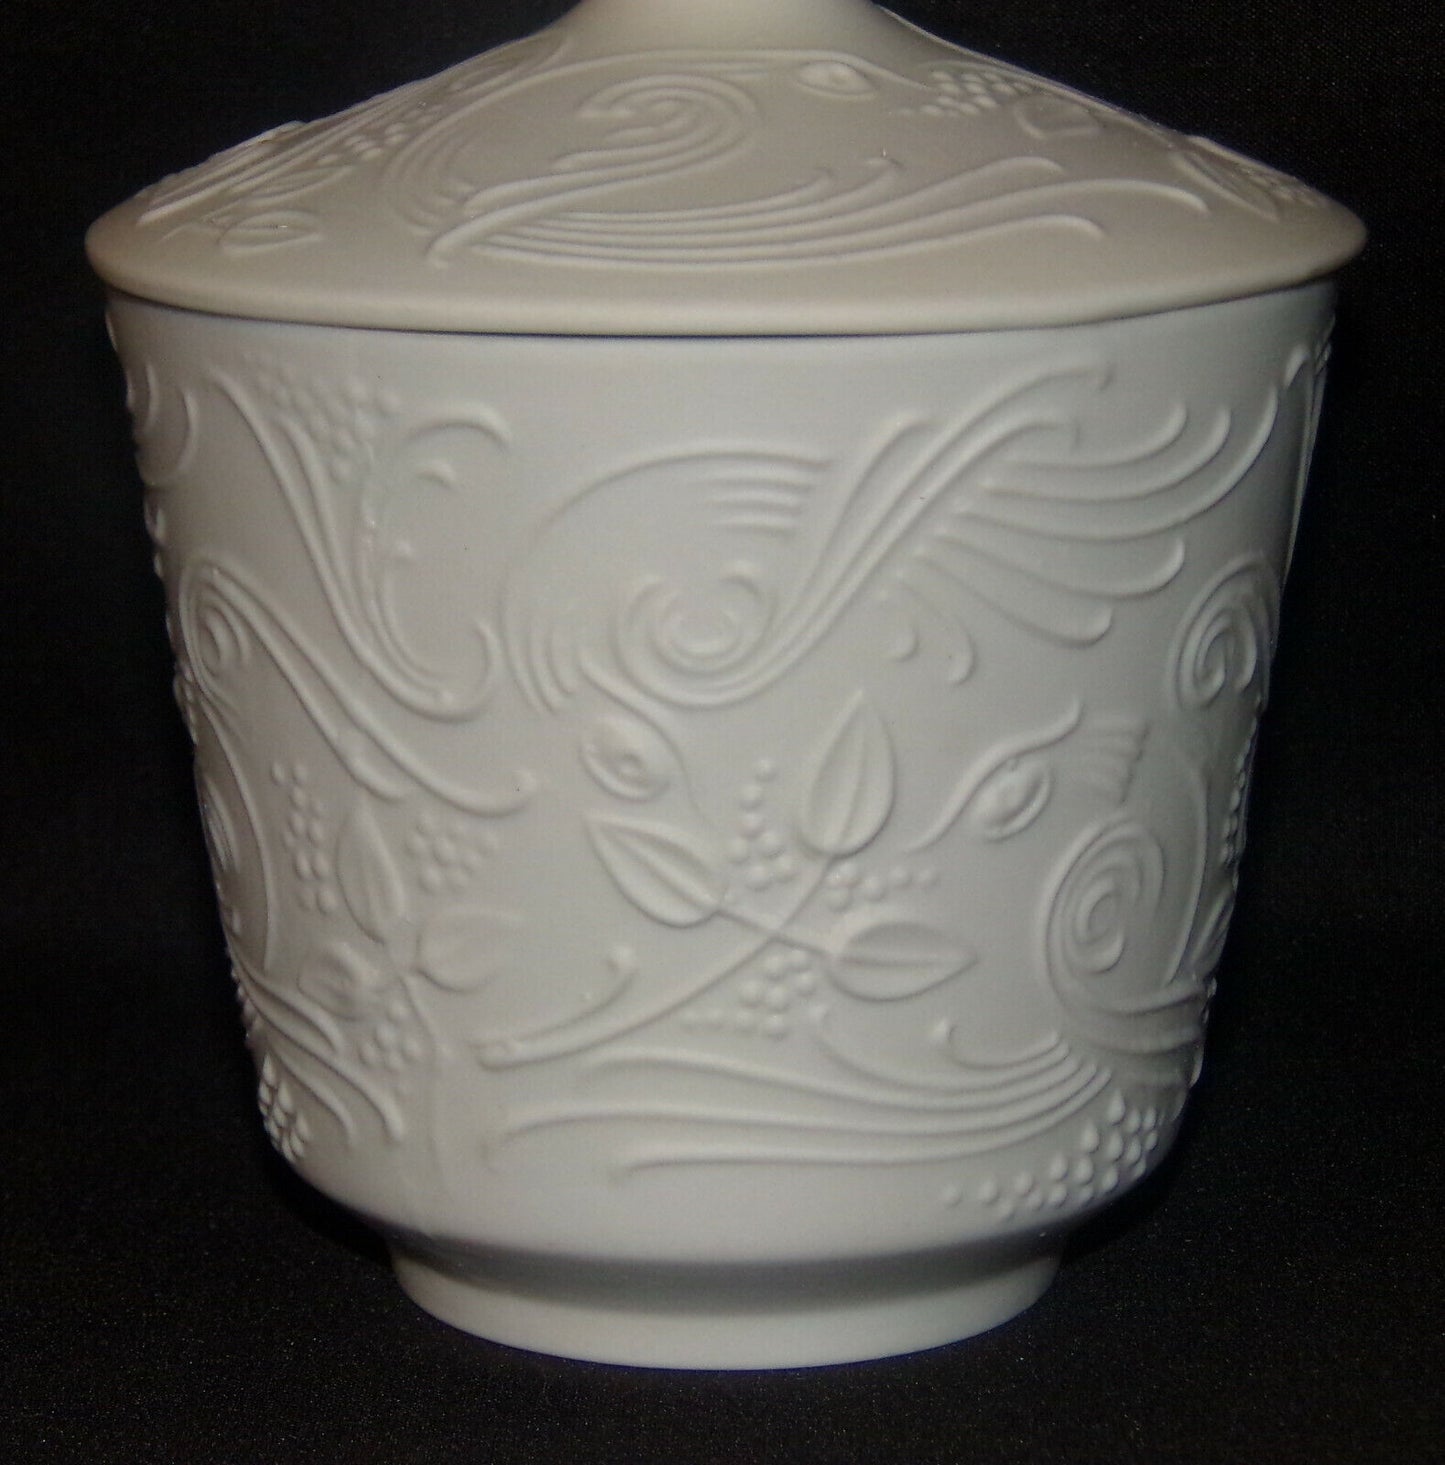 Vintage White Op Art Lidded Candy Dish Bowl Mid Century 1950's Bavaria Germany